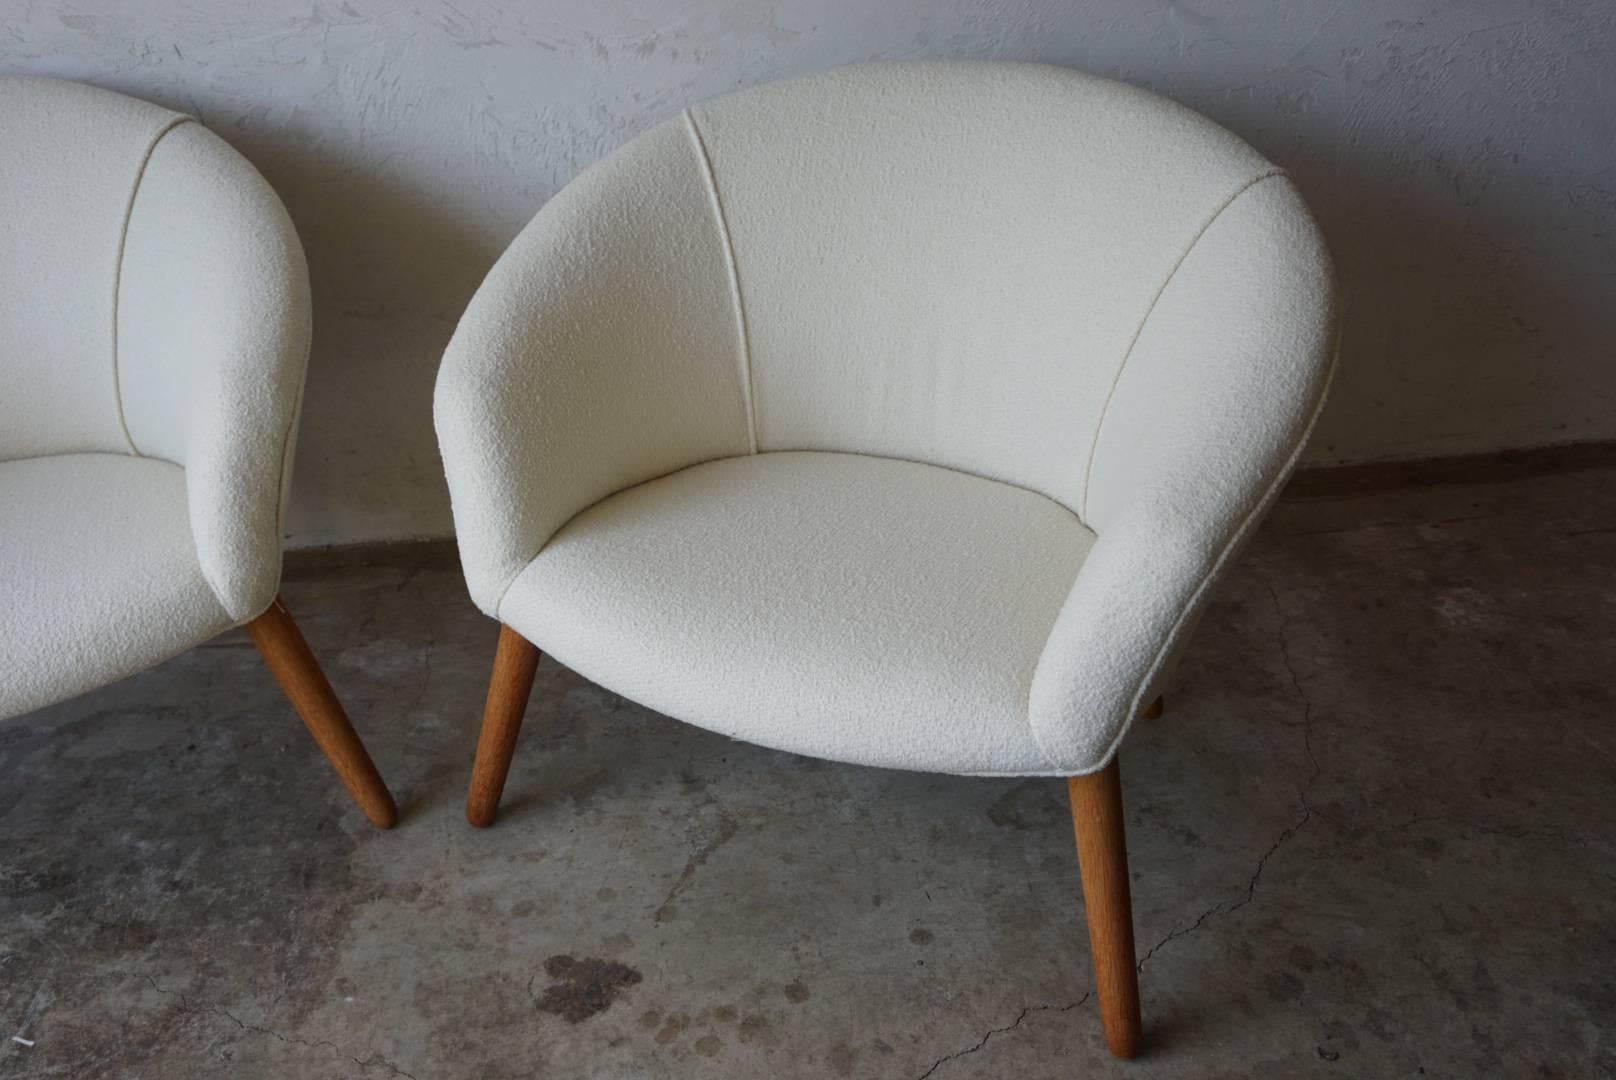 Nanna Ditzel AP 26 Lounge Chairs, 1953 In Excellent Condition For Sale In Berkeley, CA